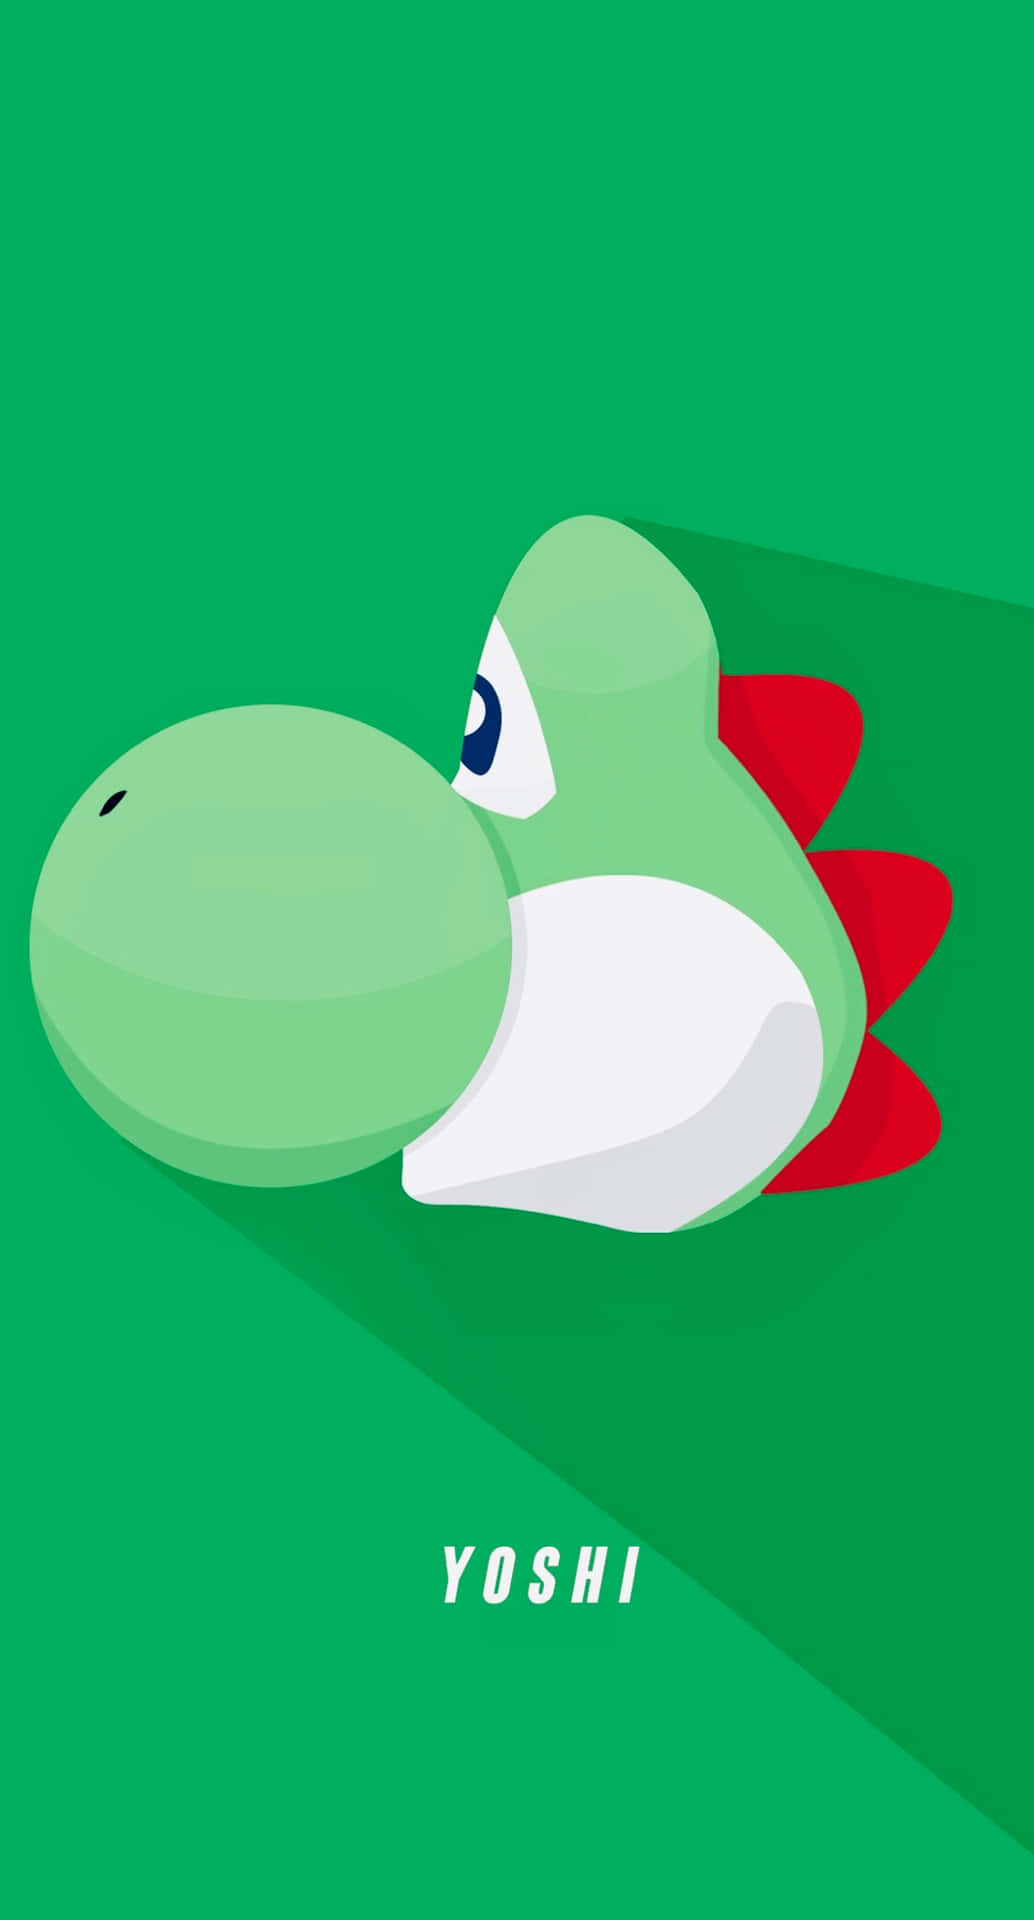 A Green Background With A Yoshi Character On It